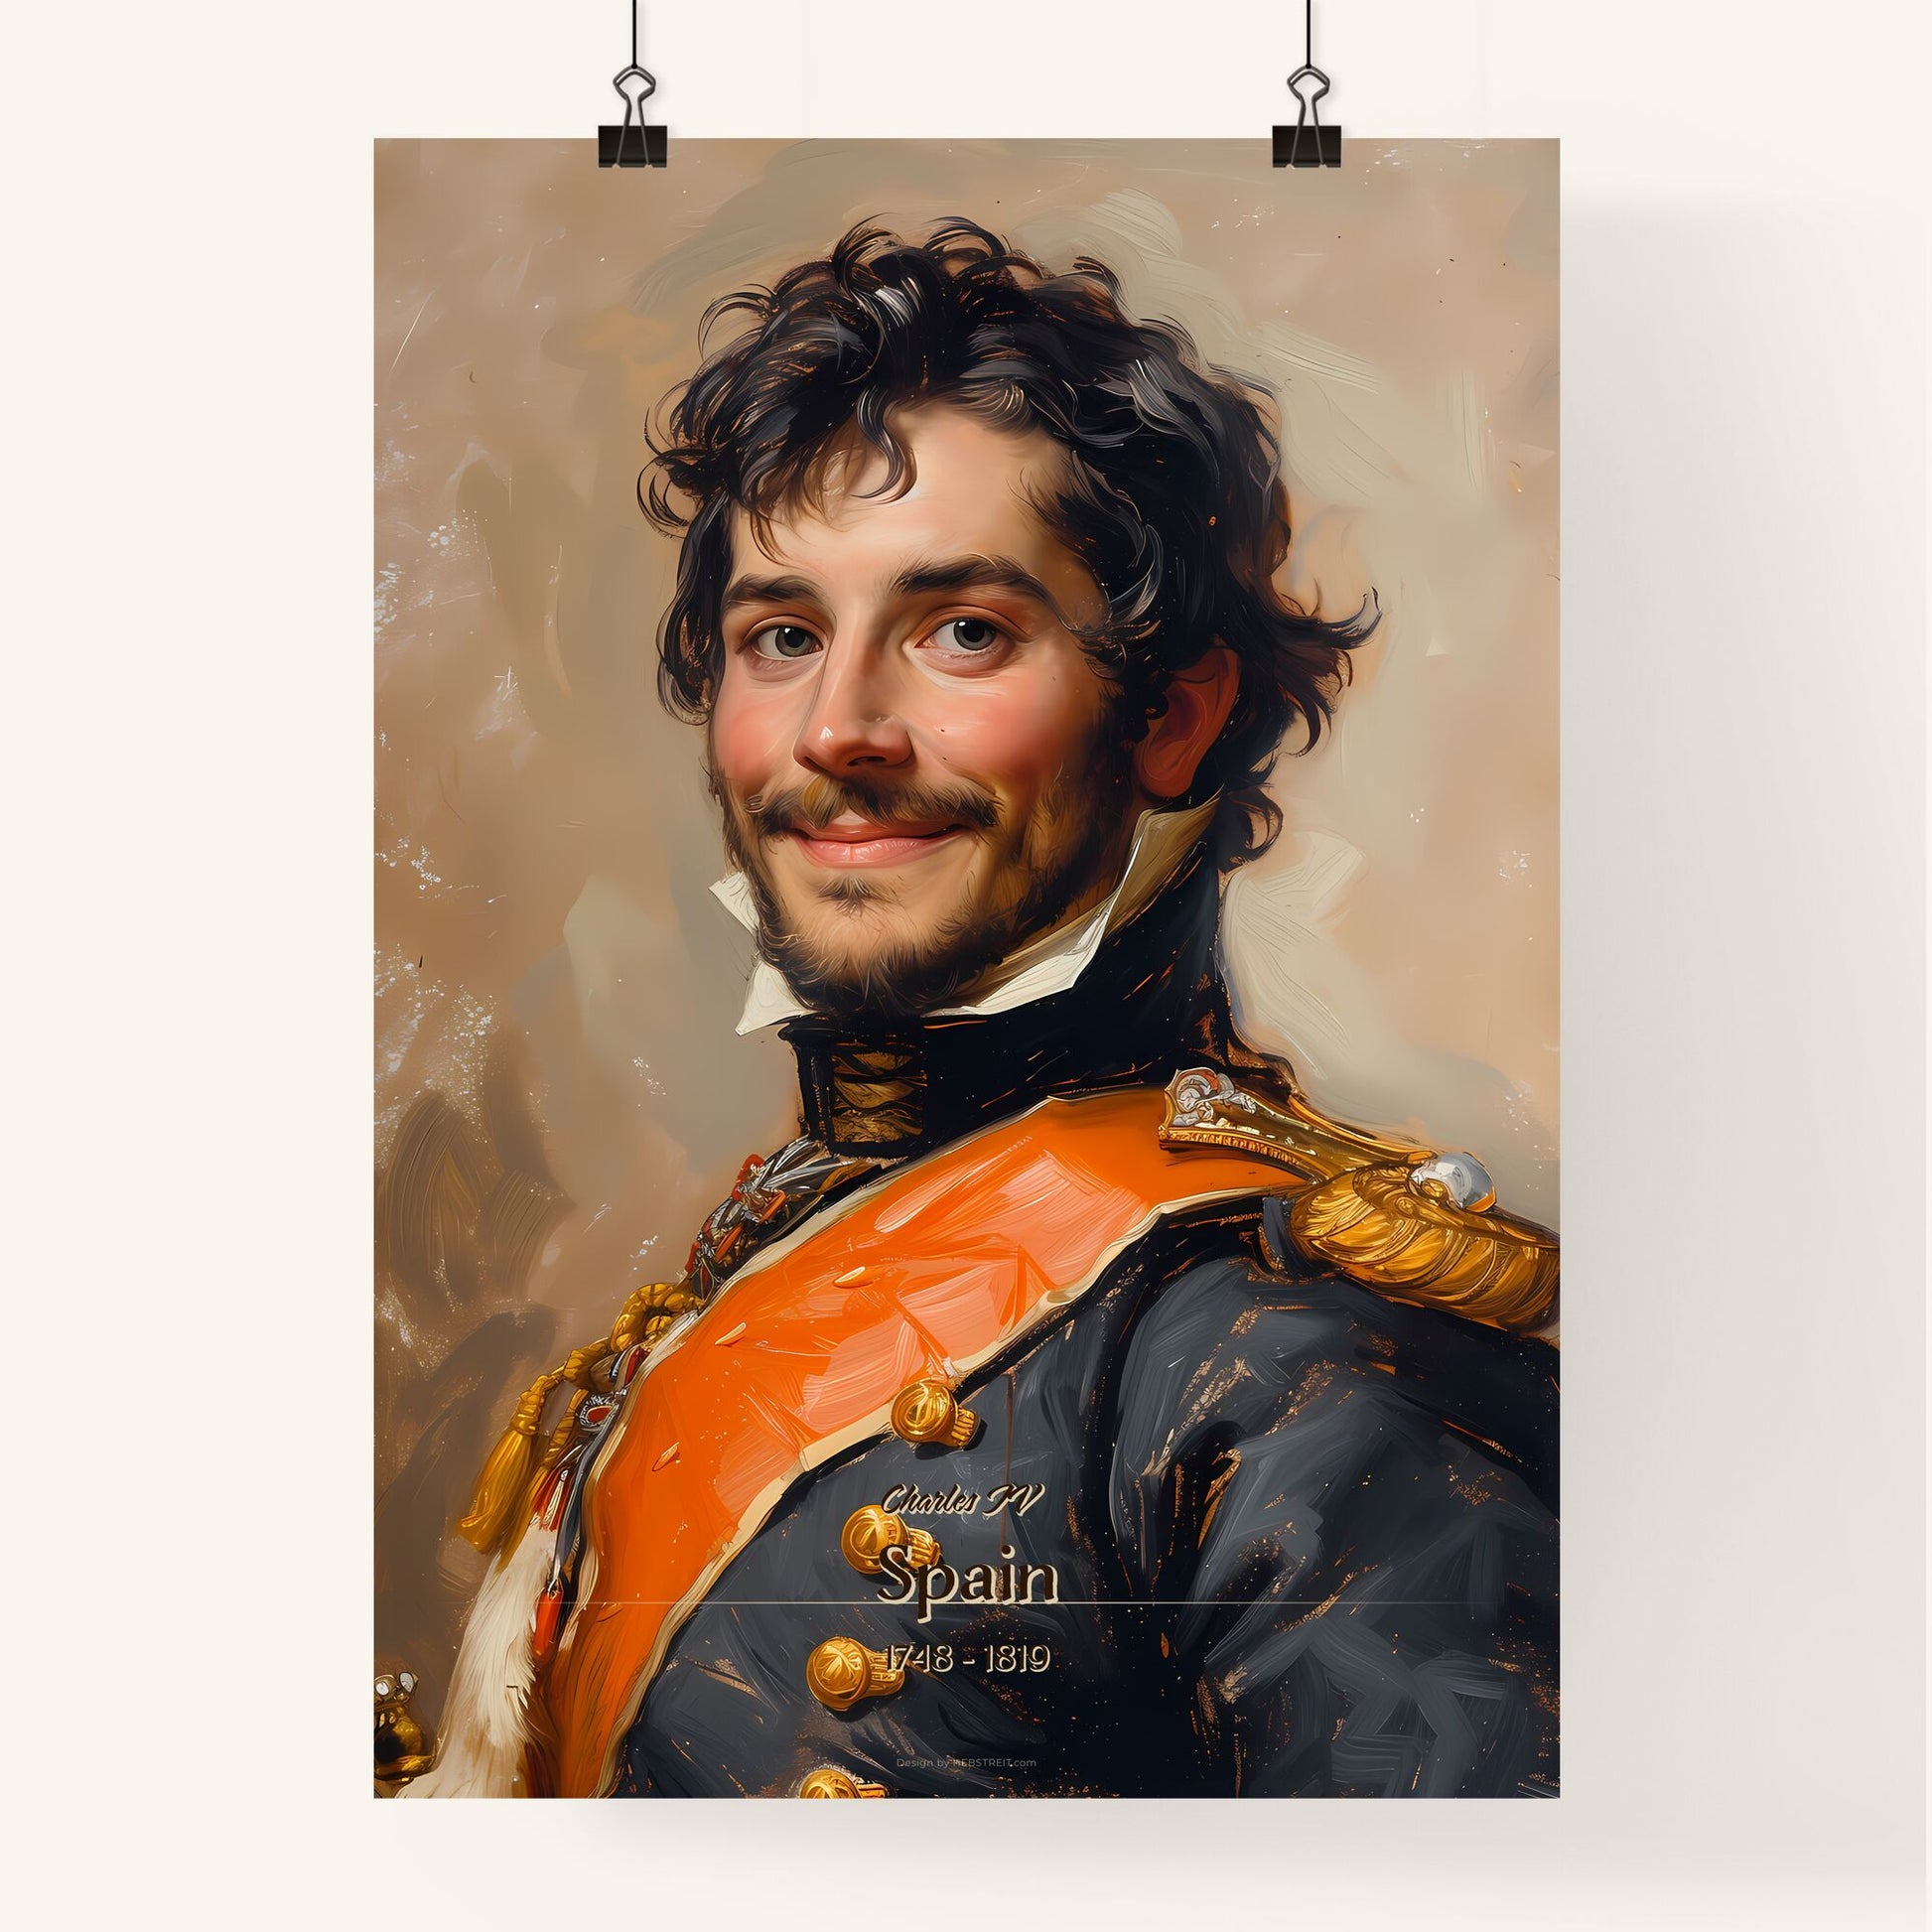 Charles IV, Spain, 1748 - 1819, A Poster of a man in a uniform Default Title